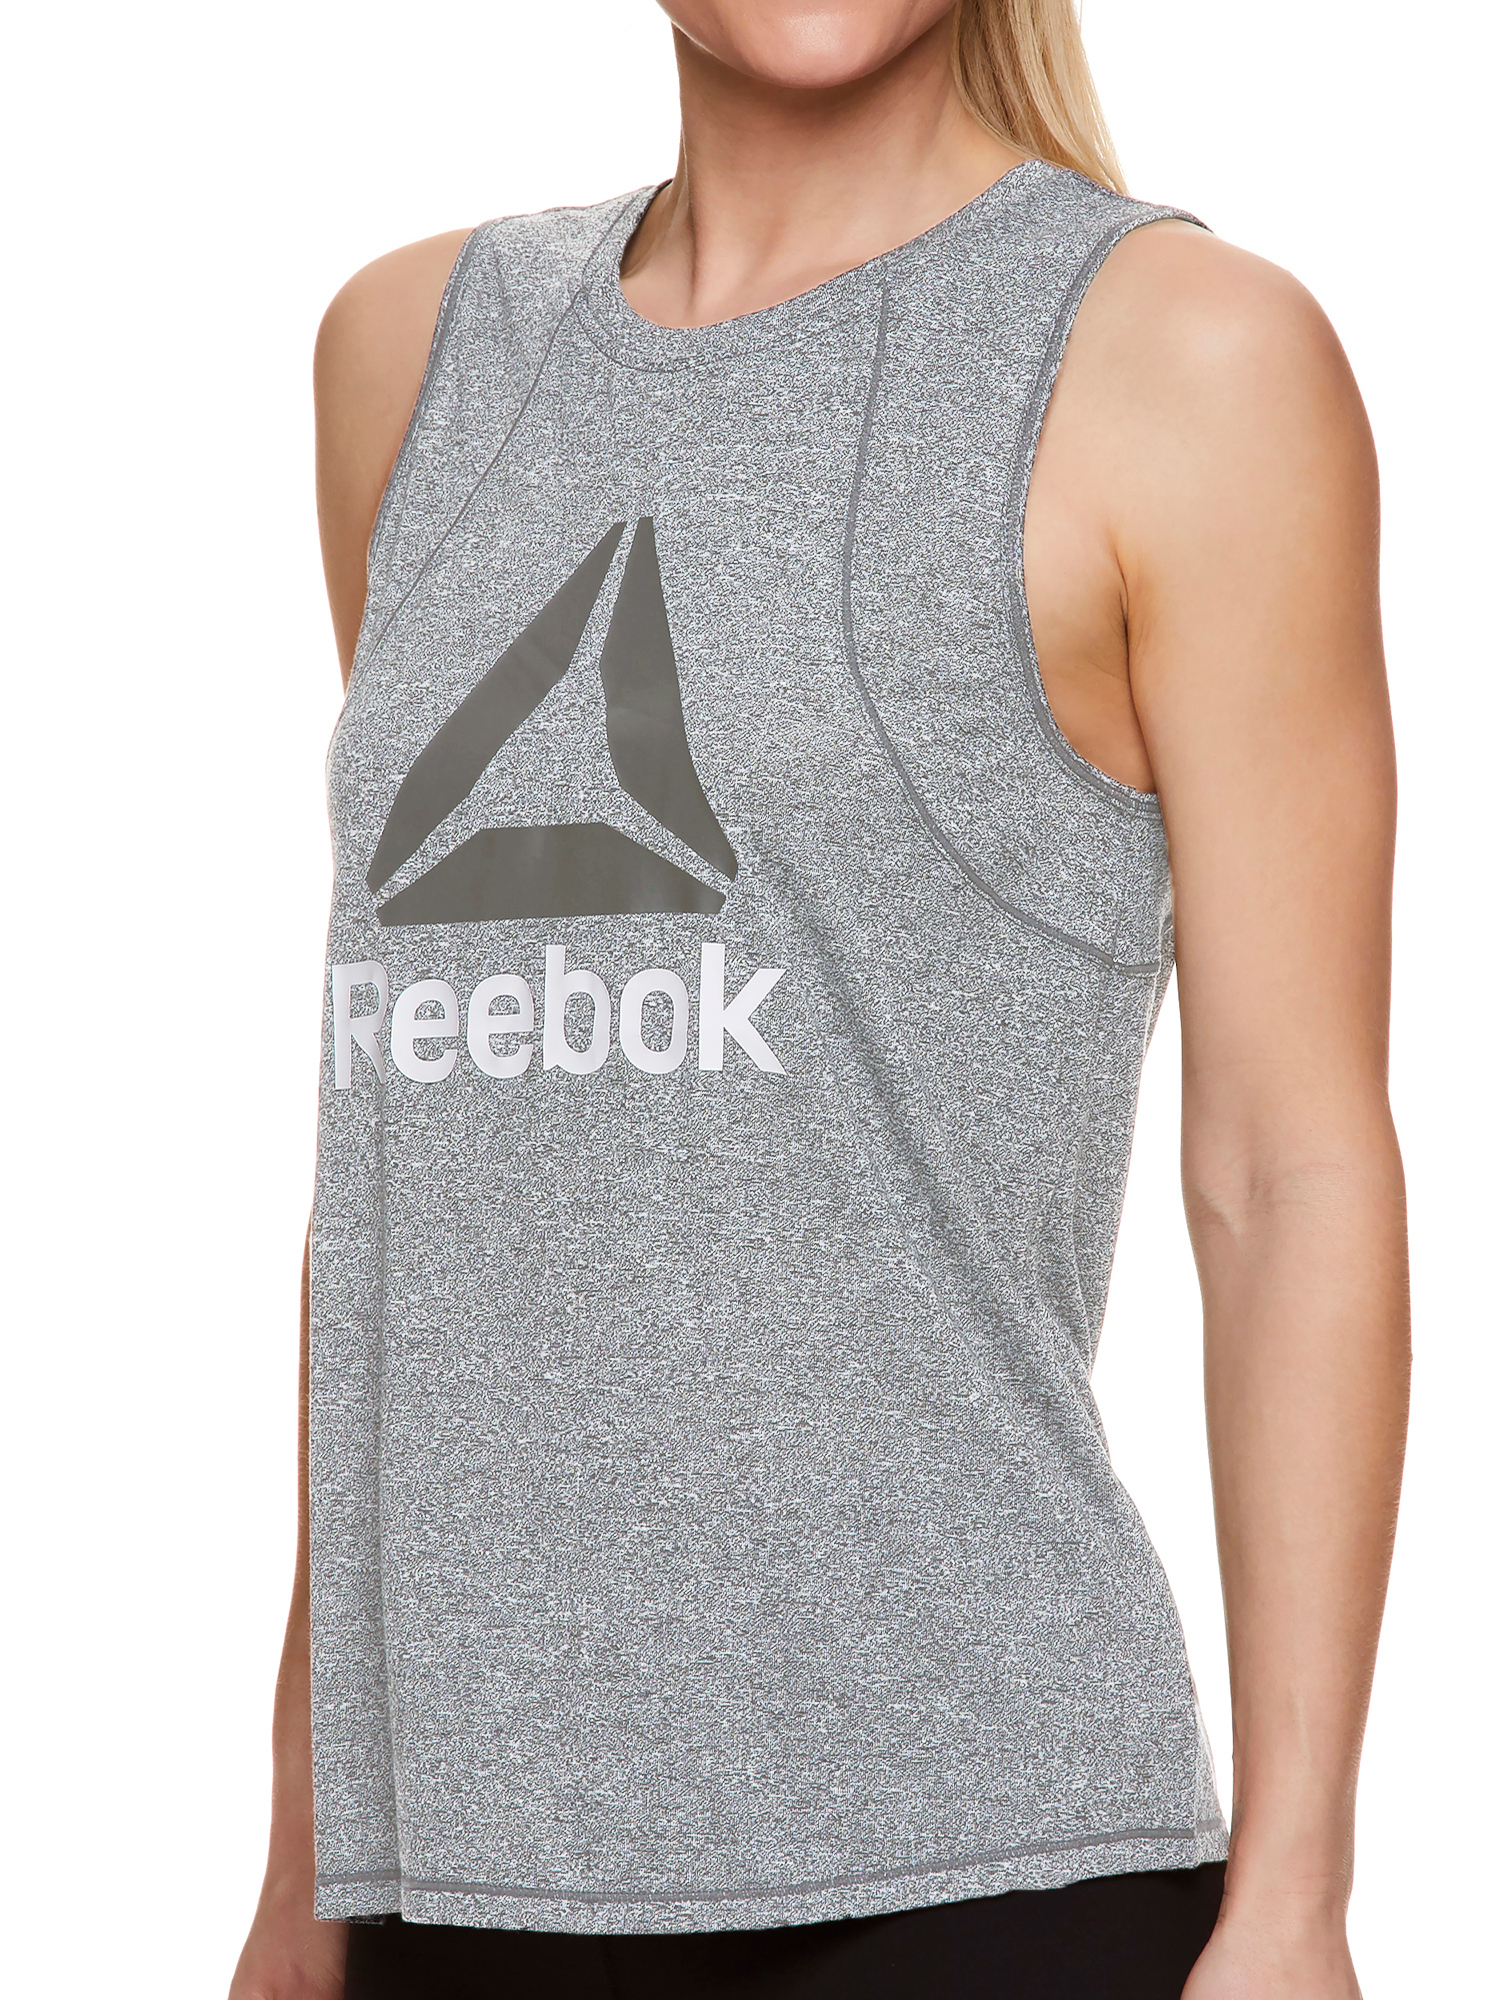 Reebok Womens Muscle Graphic Tank Top - image 2 of 4